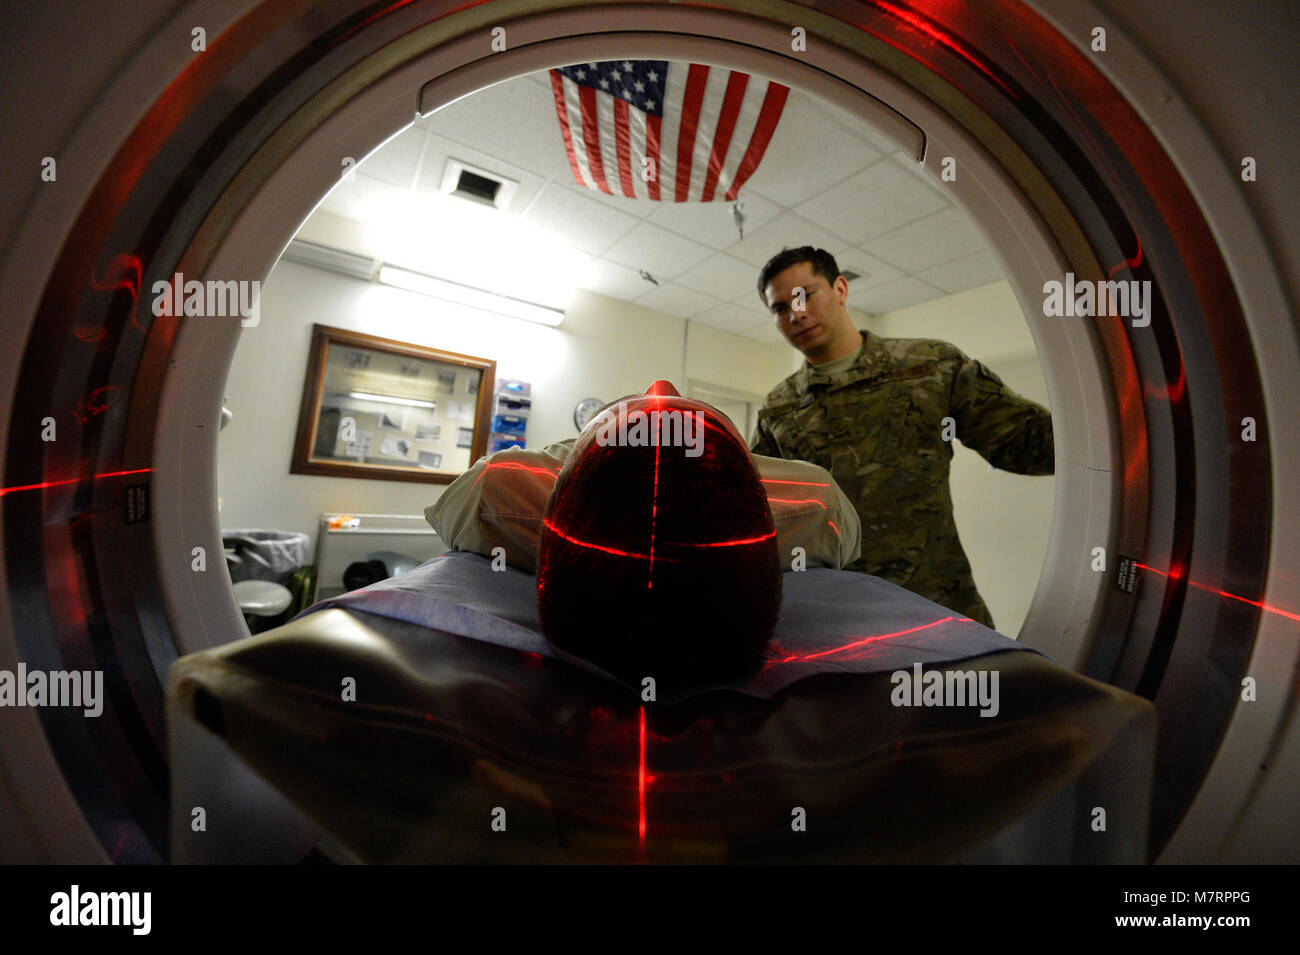 U.S. Air Force Senior Airman Freddy Toruno, 455th Expeditionary Medical Support Squadron diagnostic imaging technologists, positions a service member for a CT scan at Bagram Airfield, Afghanistan’s Craig Joint Theater Hospital July 24, 2014.  The CT scan helps radiologists diagnose different types of disease and injuries, such at traumatic brain injuries.  Toruno is deployed from Travis Air Force Base, Calif. and a native of Miami, Fla.  (U.S. Air Force photo by Staff Sgt. Evelyn Chavez/Released) 455th Air Expeditionary Wing Bagram Airfield, Afghanistan Stock Photo